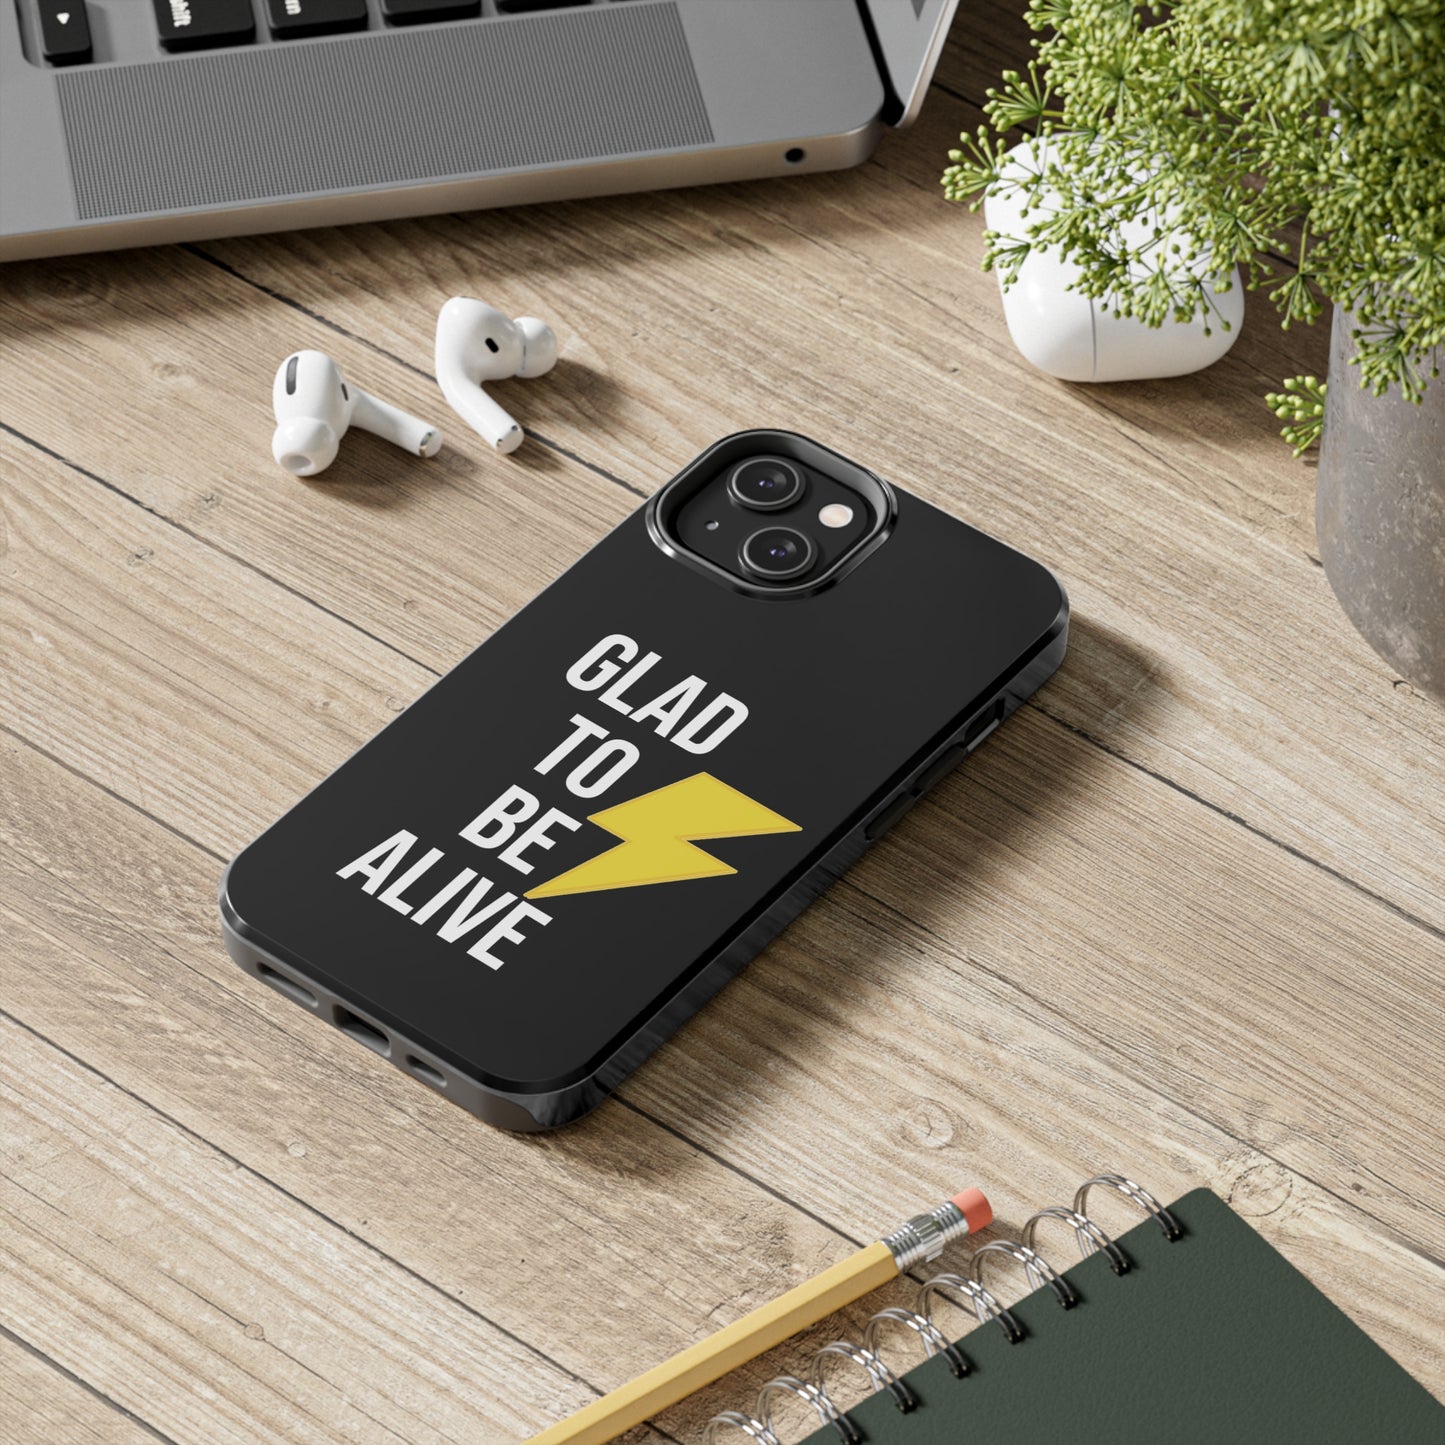 Glad To Be Alive iPhone Cases